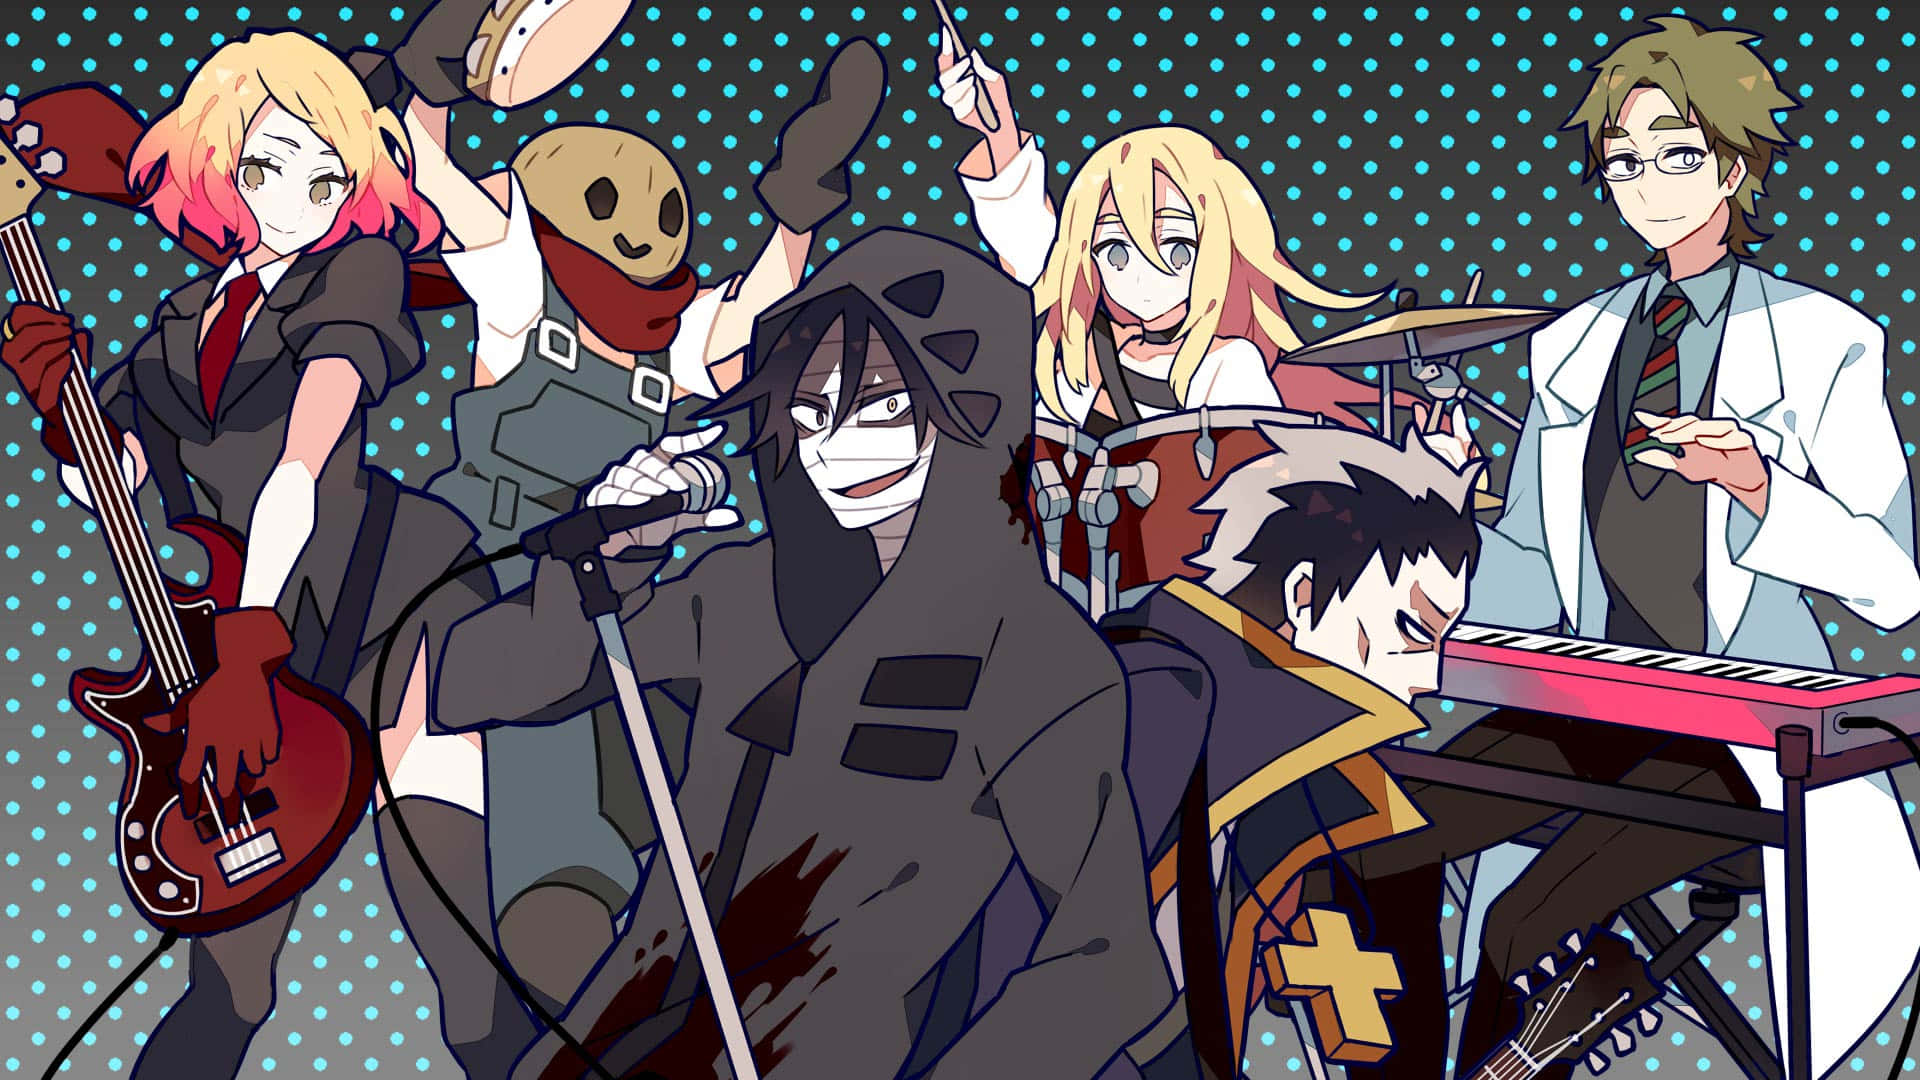 Angels of Death Anime Wallpaper & Background